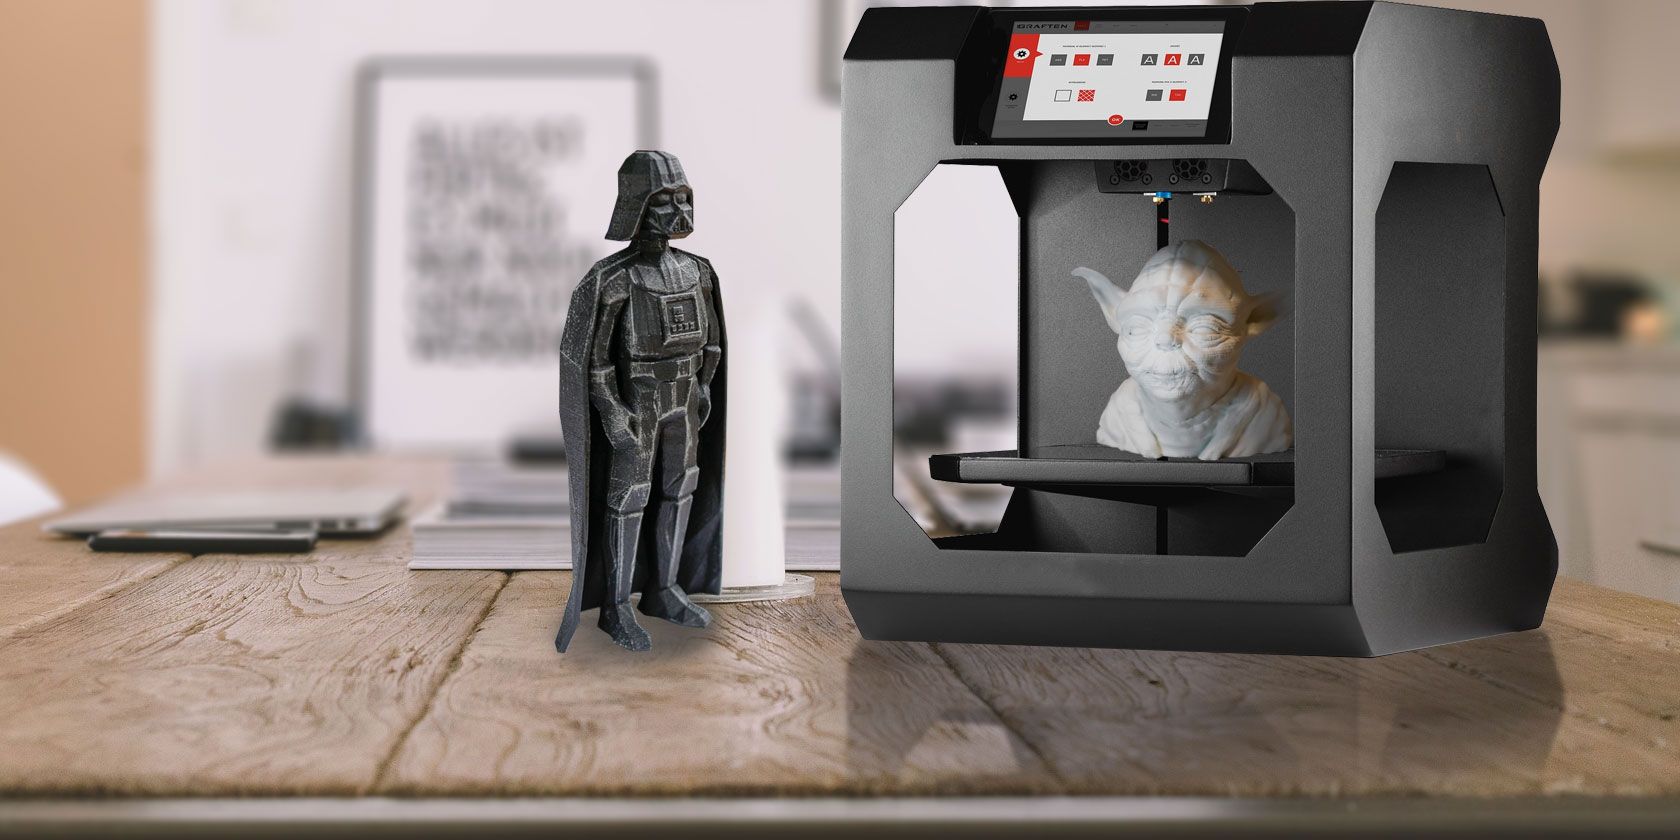 15 Awesome Star Wars Props You Can 3D Print